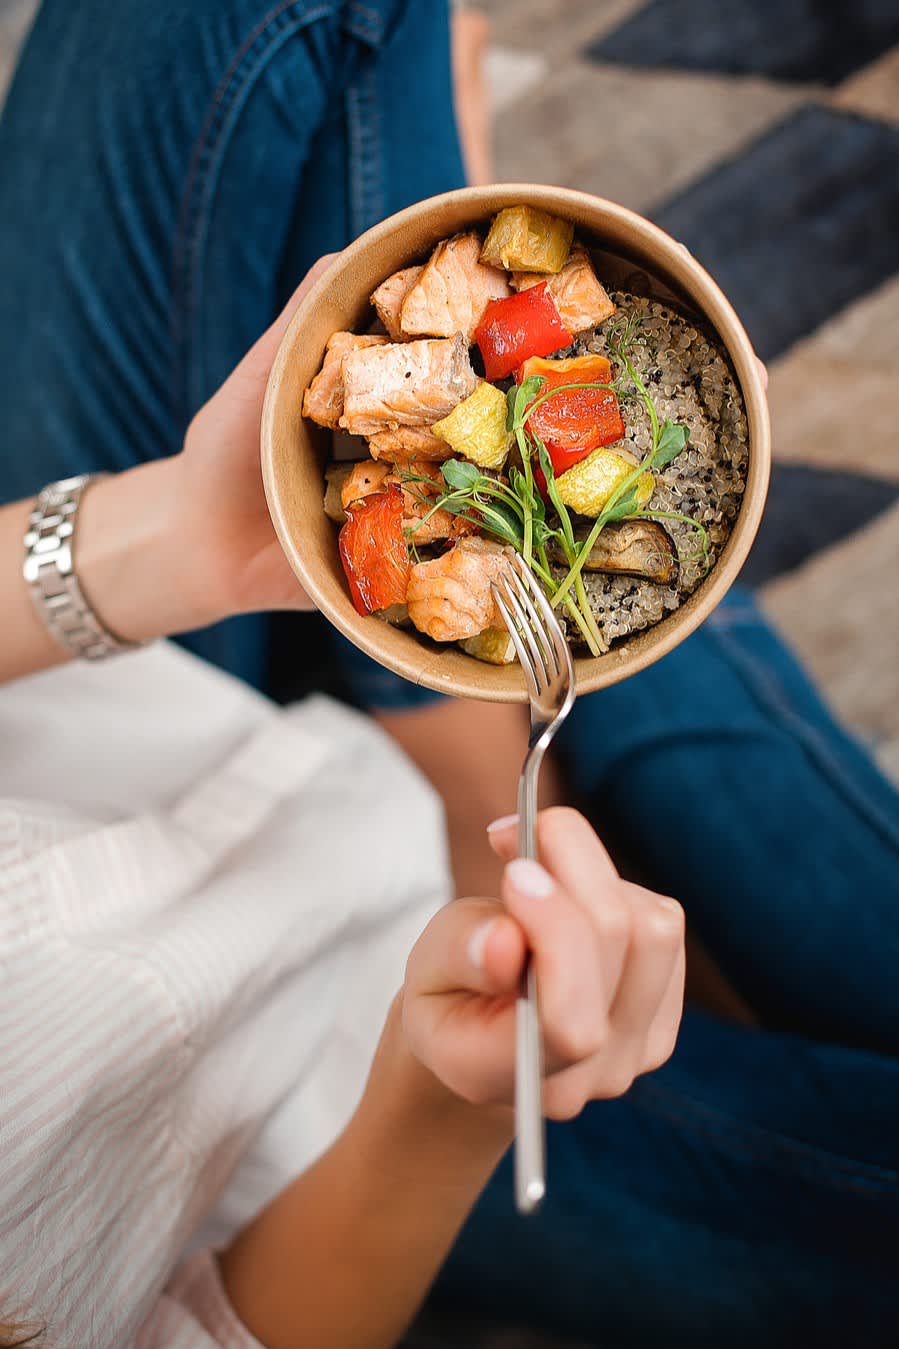 Person holding a bowl of healthy food items